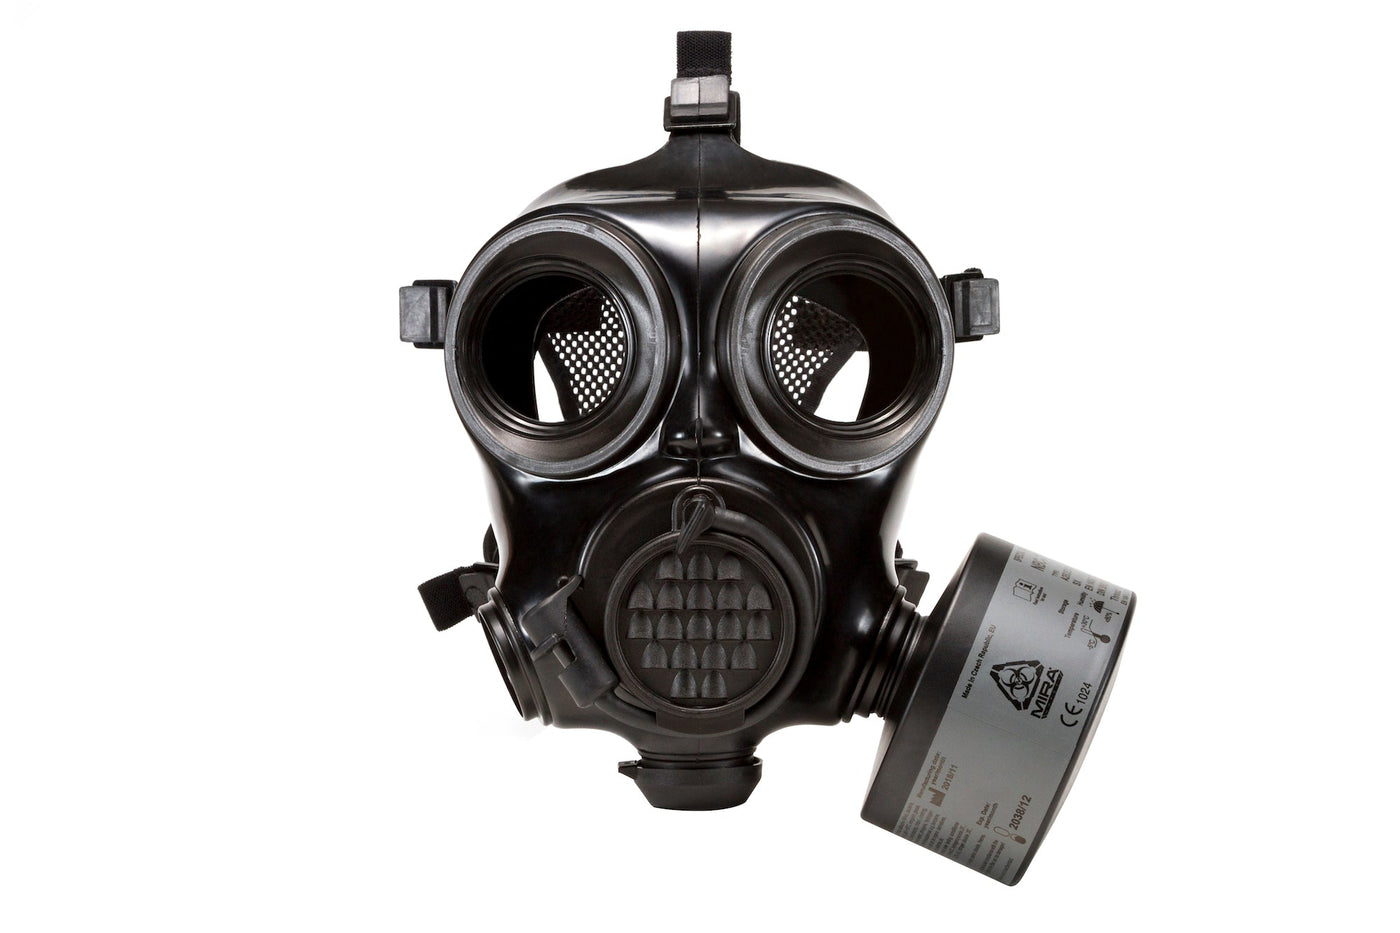 Front view of the CM-7M Military Gas Mask with CBRN filter